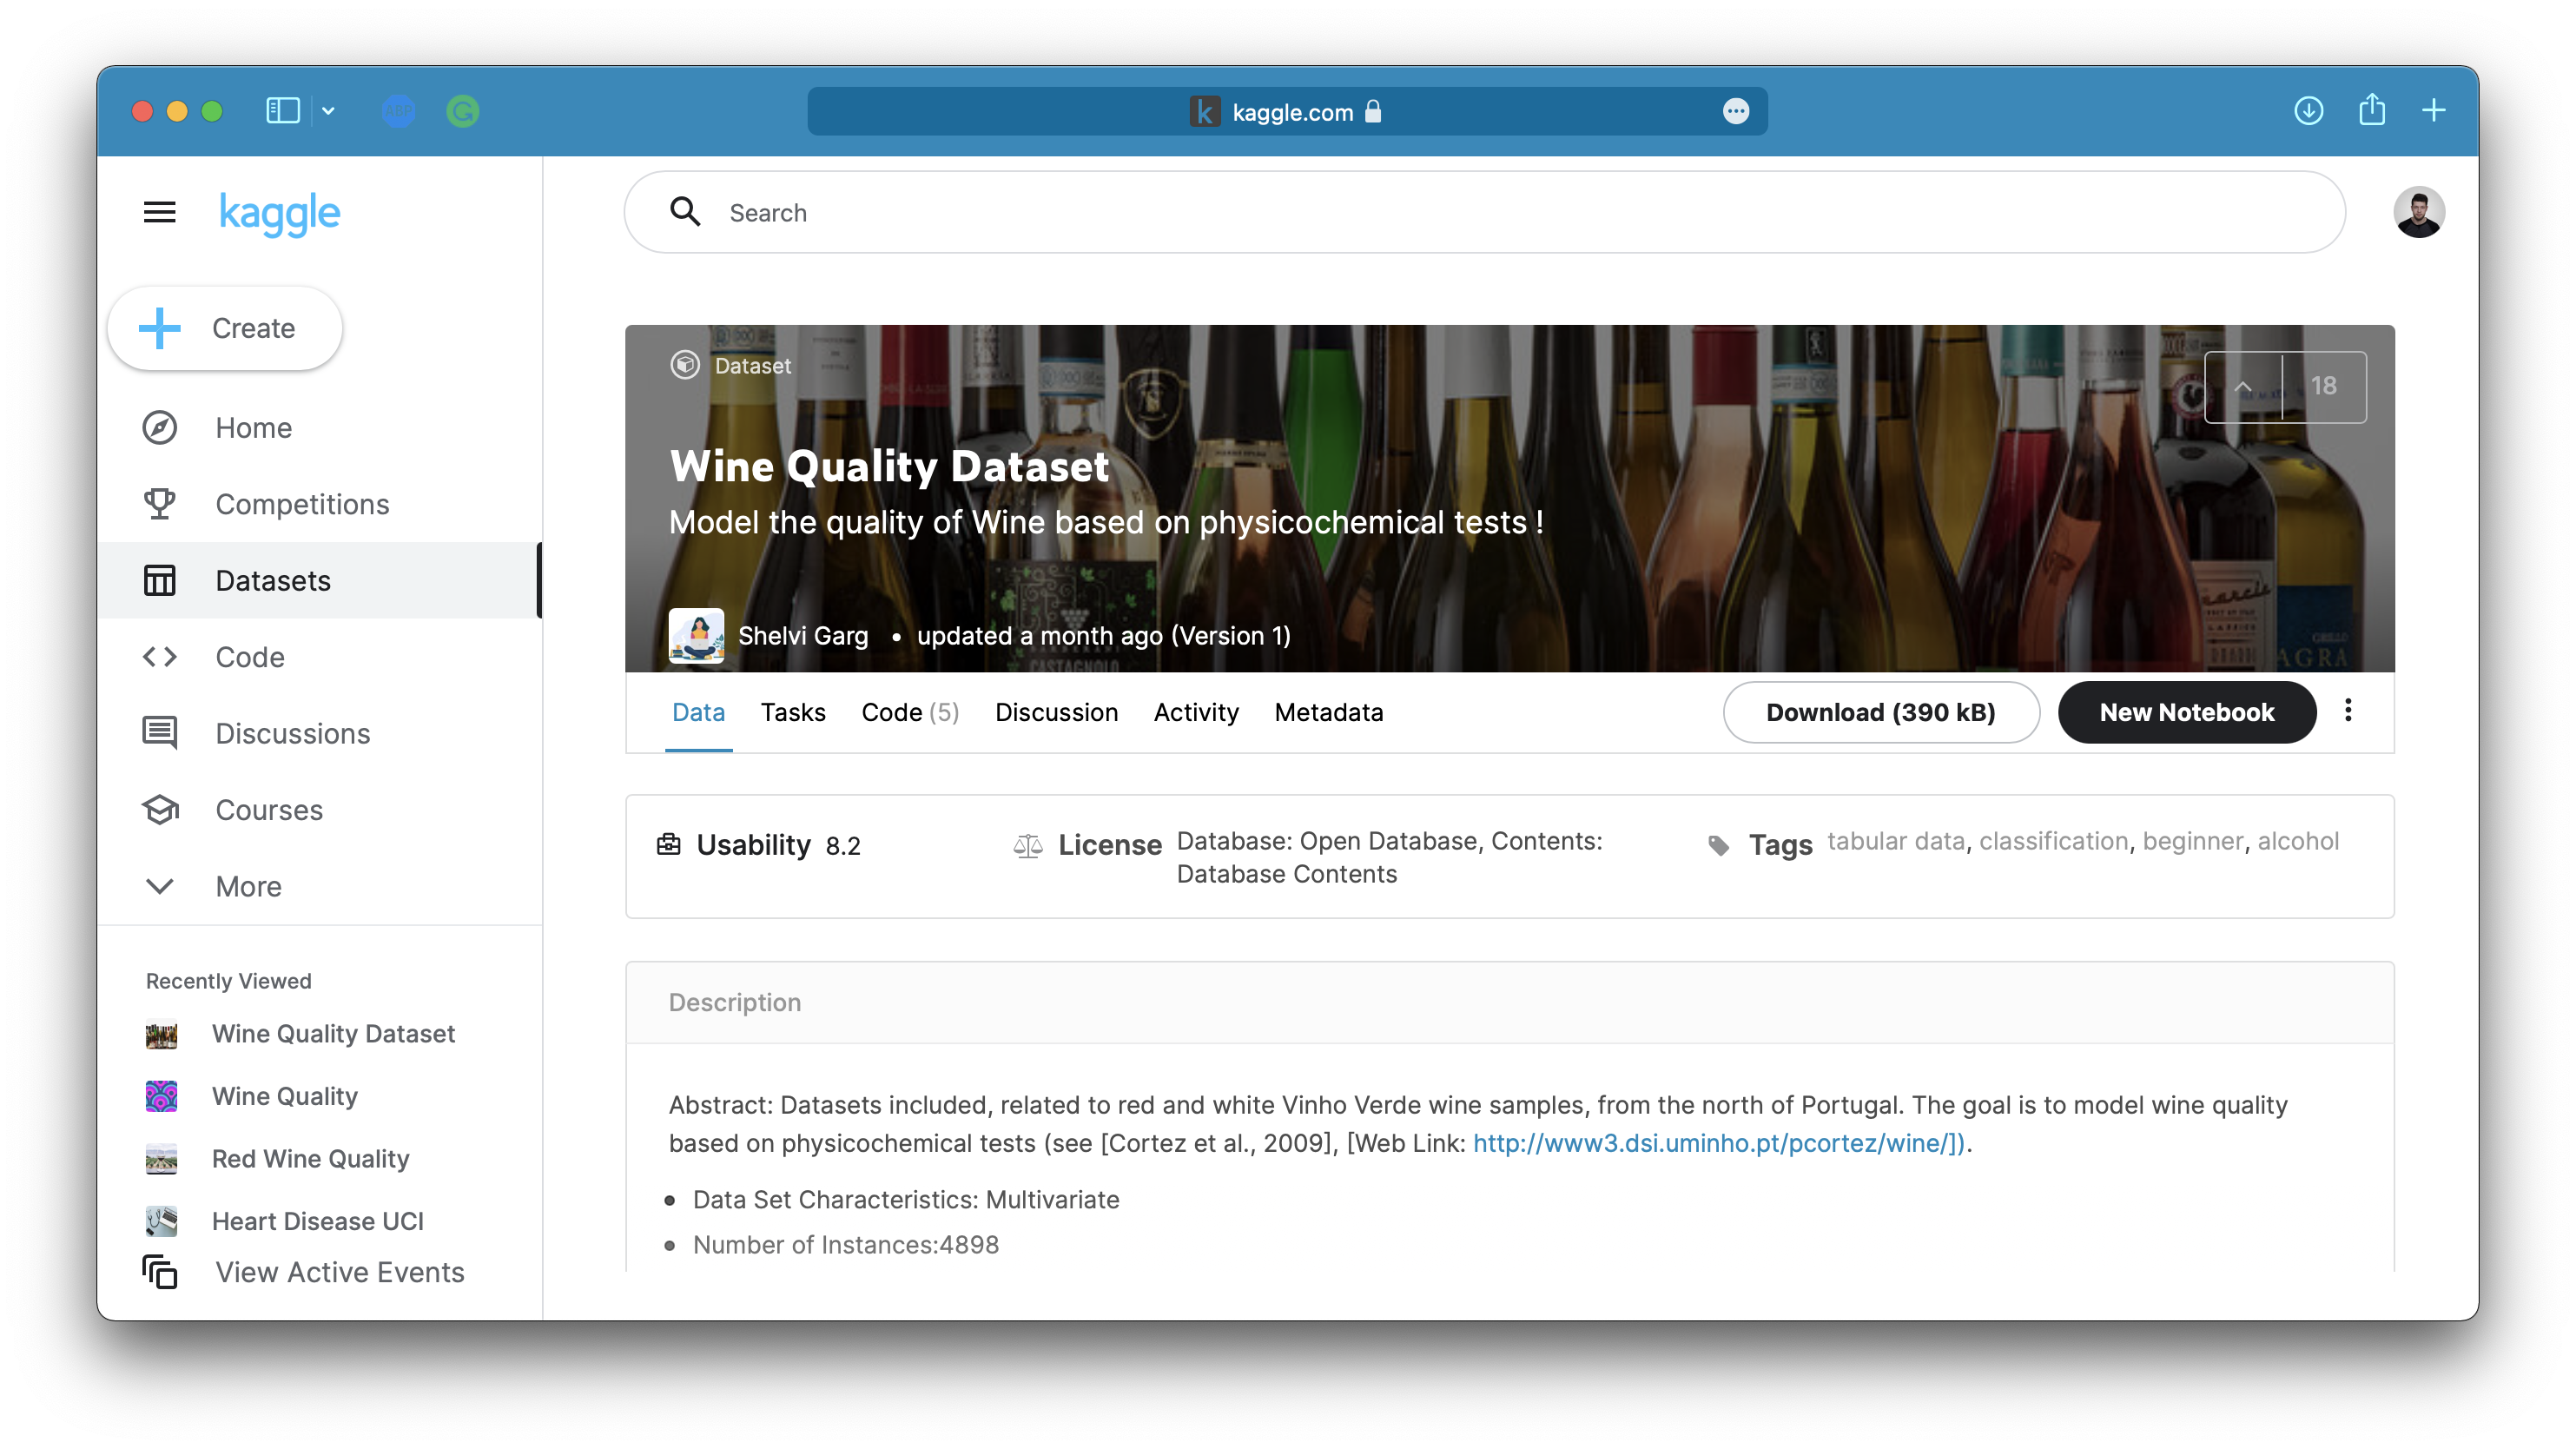 Image 1 — Wine quality dataset from Kaggle (image by author)